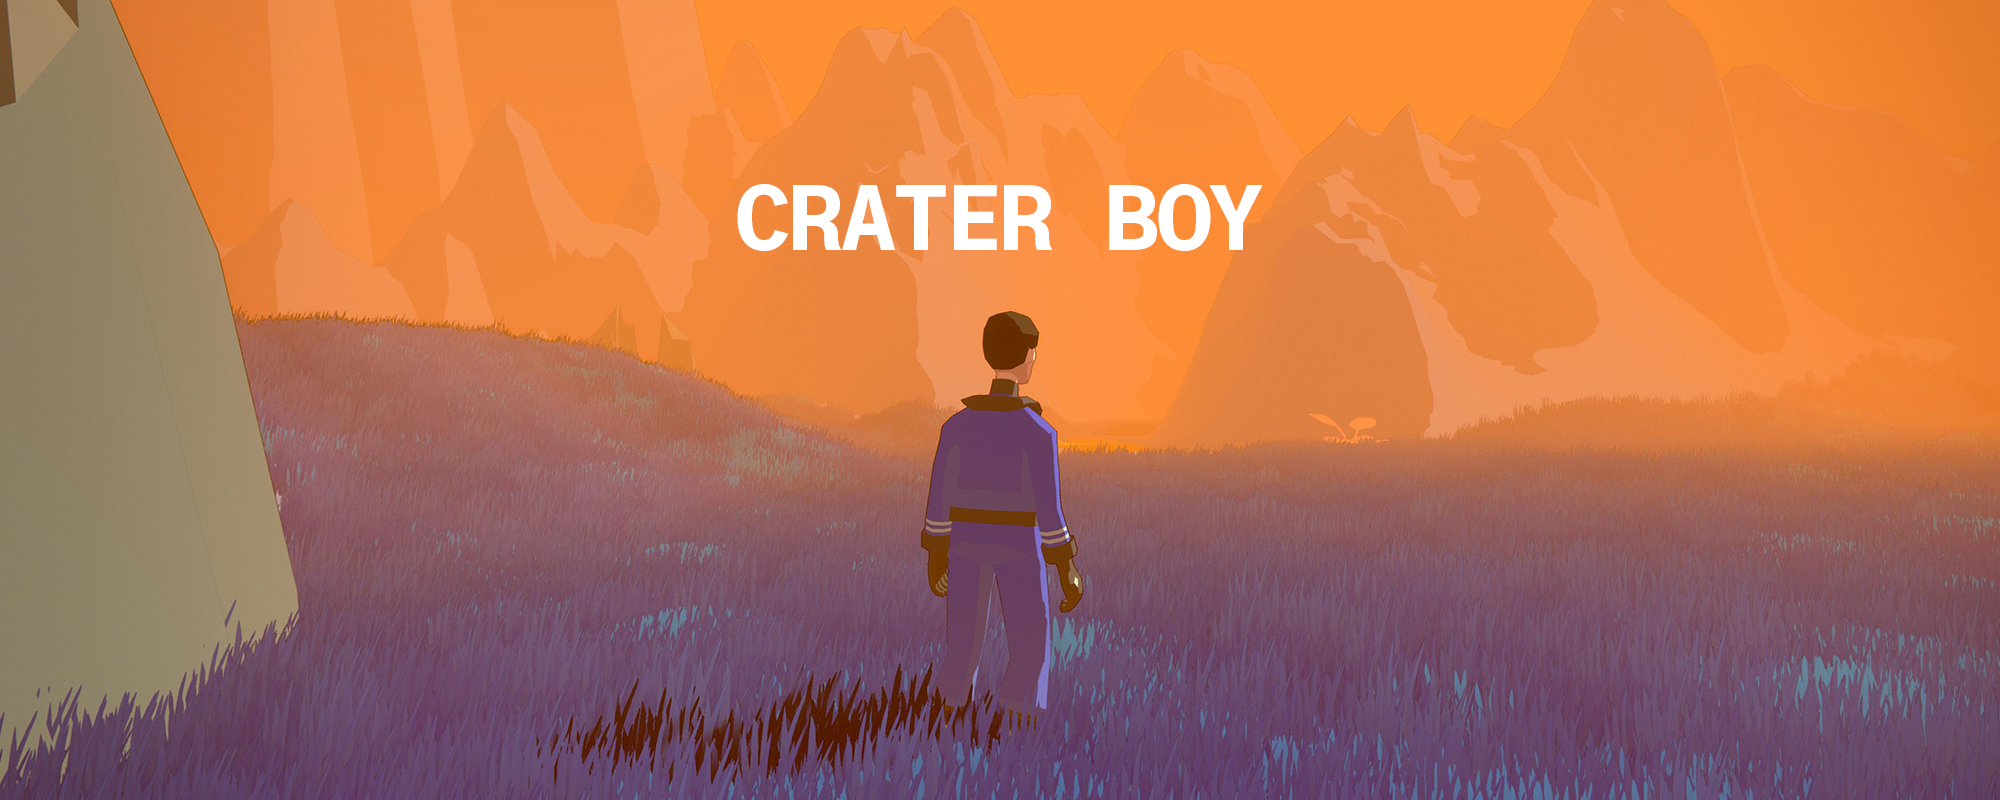 Crater Boy